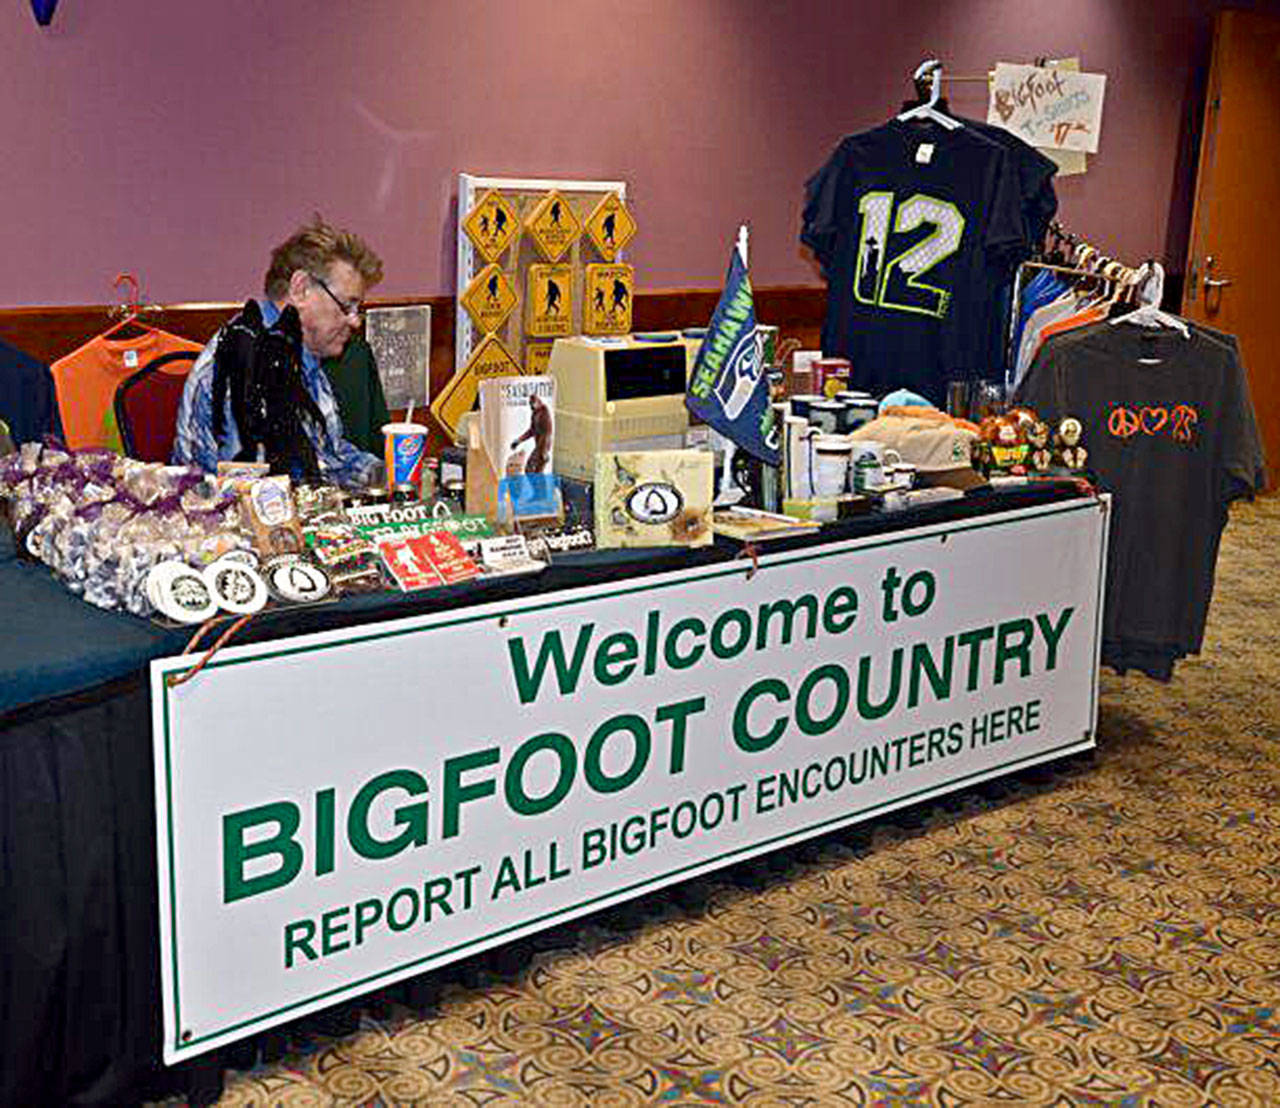 Sasquatch Festival Photo: The Quinault Beach Resort and Casino becomes Bigfoot Country central this weekend for the annual festival of Sasquatch legend, science, history and mystery. More information is available at www.sasquatchsummit.com.